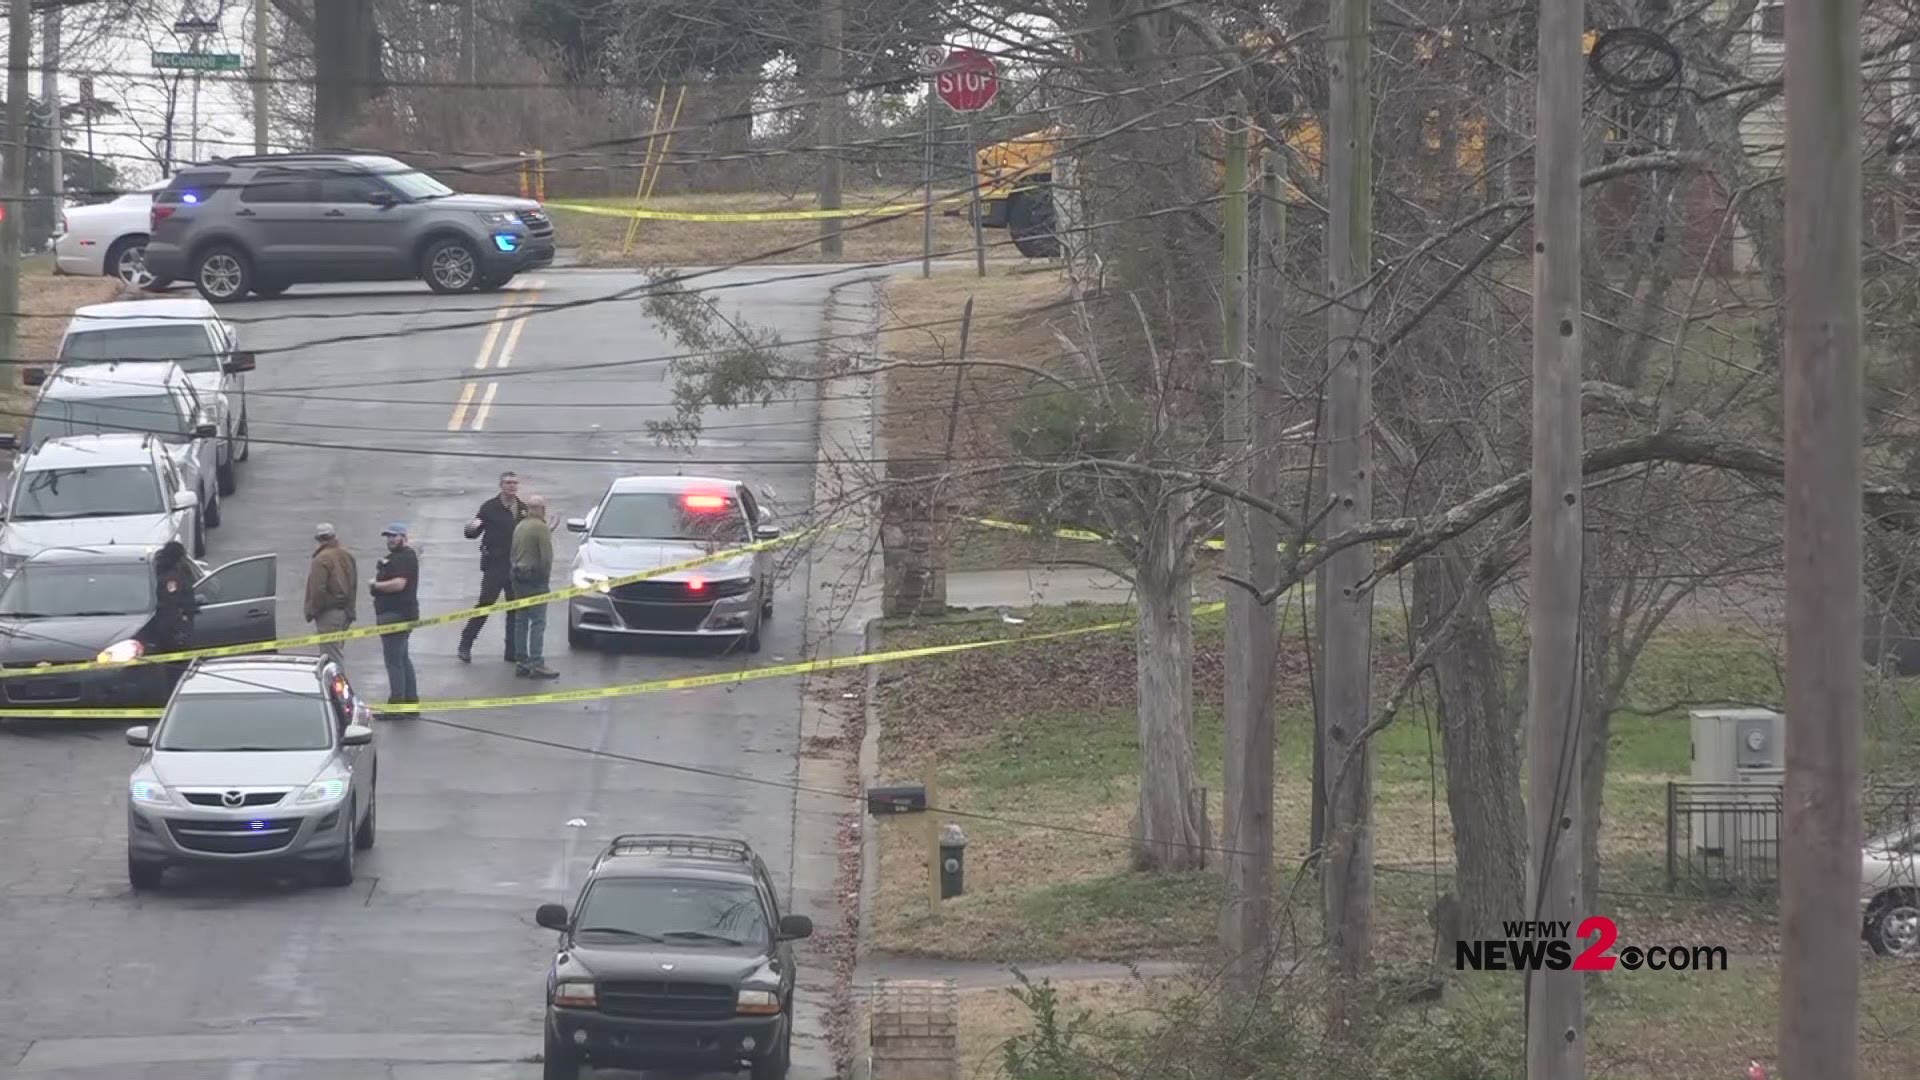 A Deputy with the Guilford County Sheriffs office was Shot While Serving a Warrant in Greensboro.